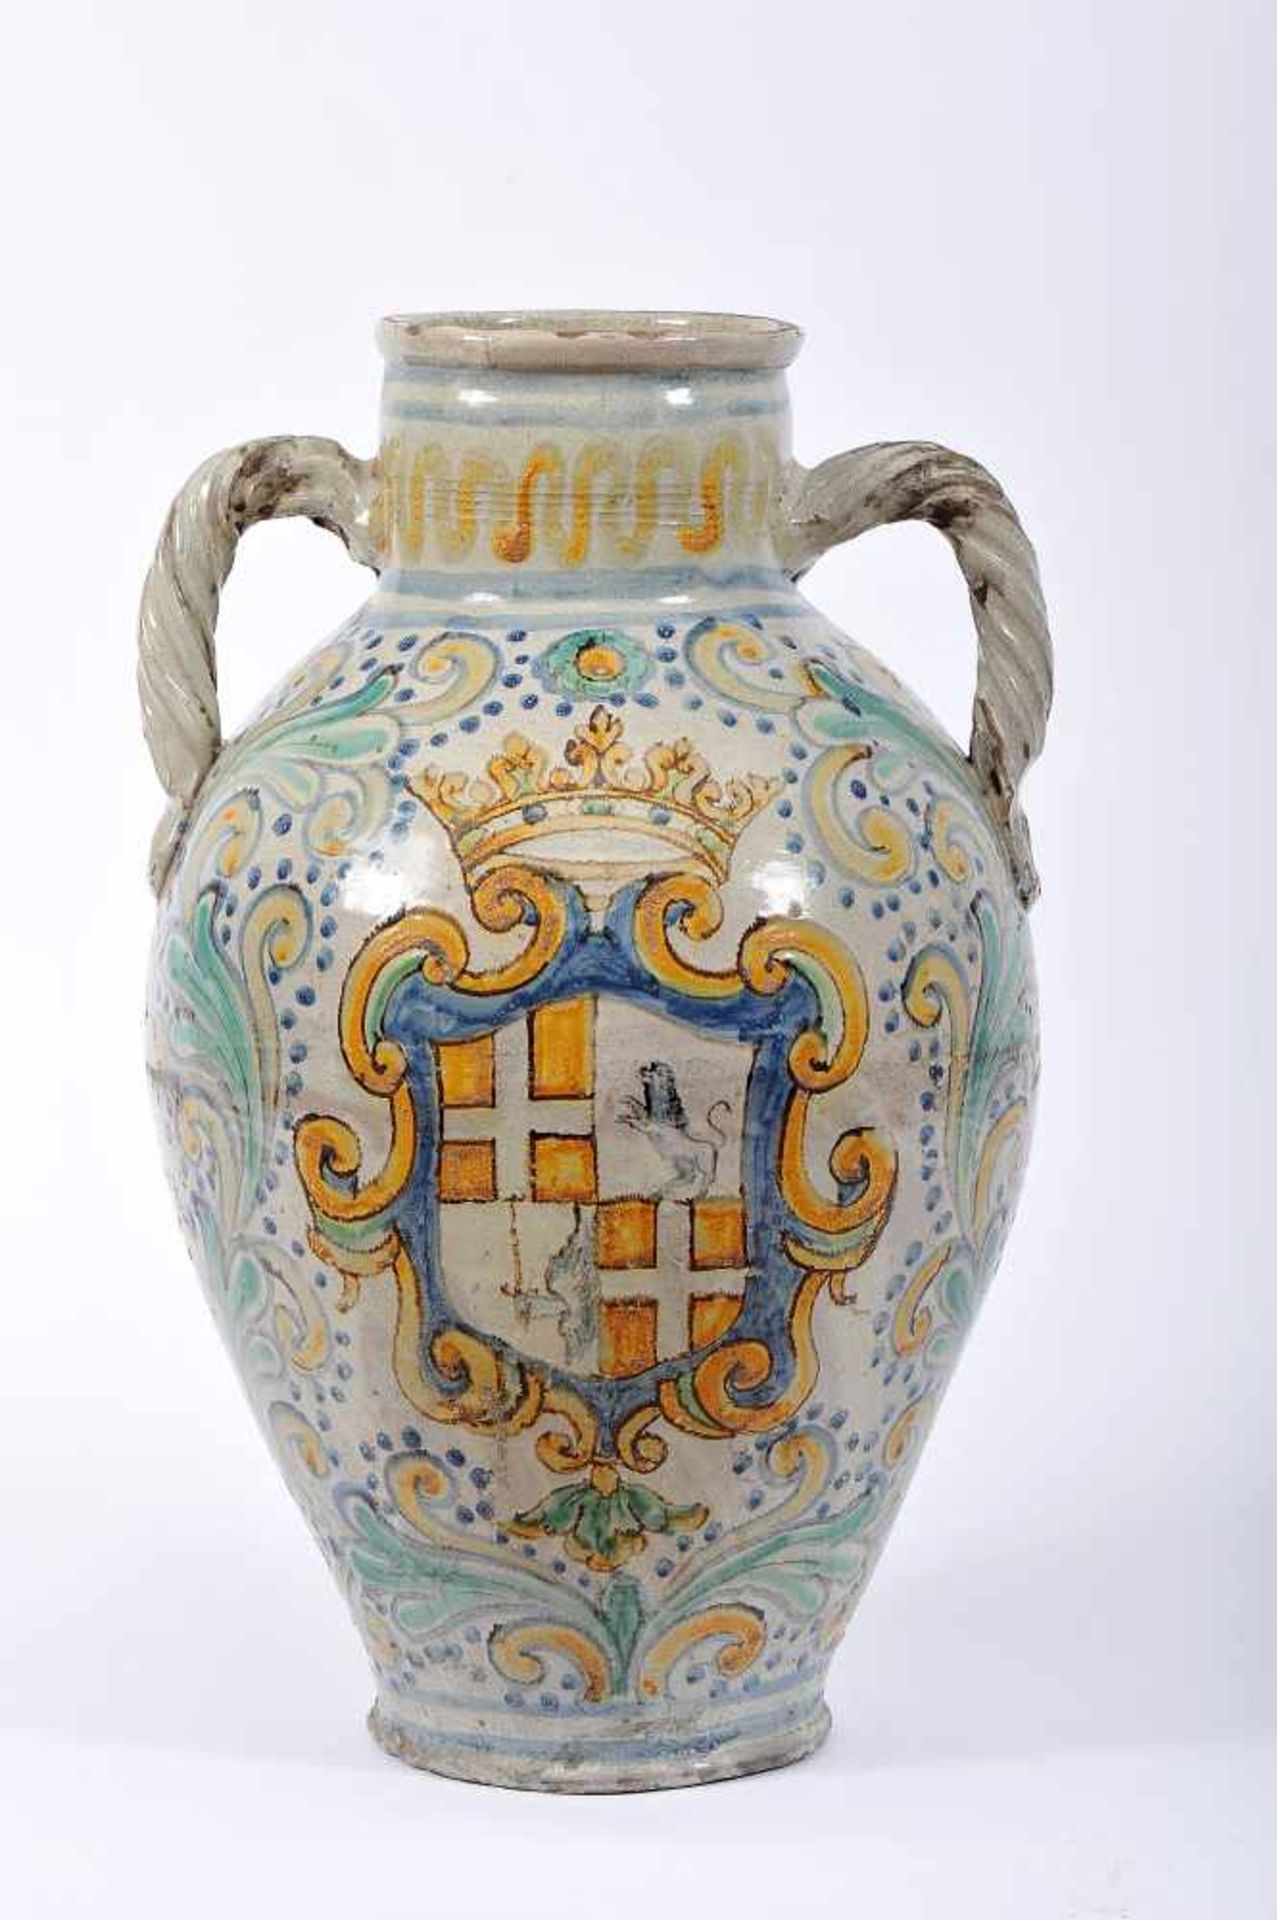 A Large Vase with two Handles, faience probably from Talavera, polychrome decoration with the coat